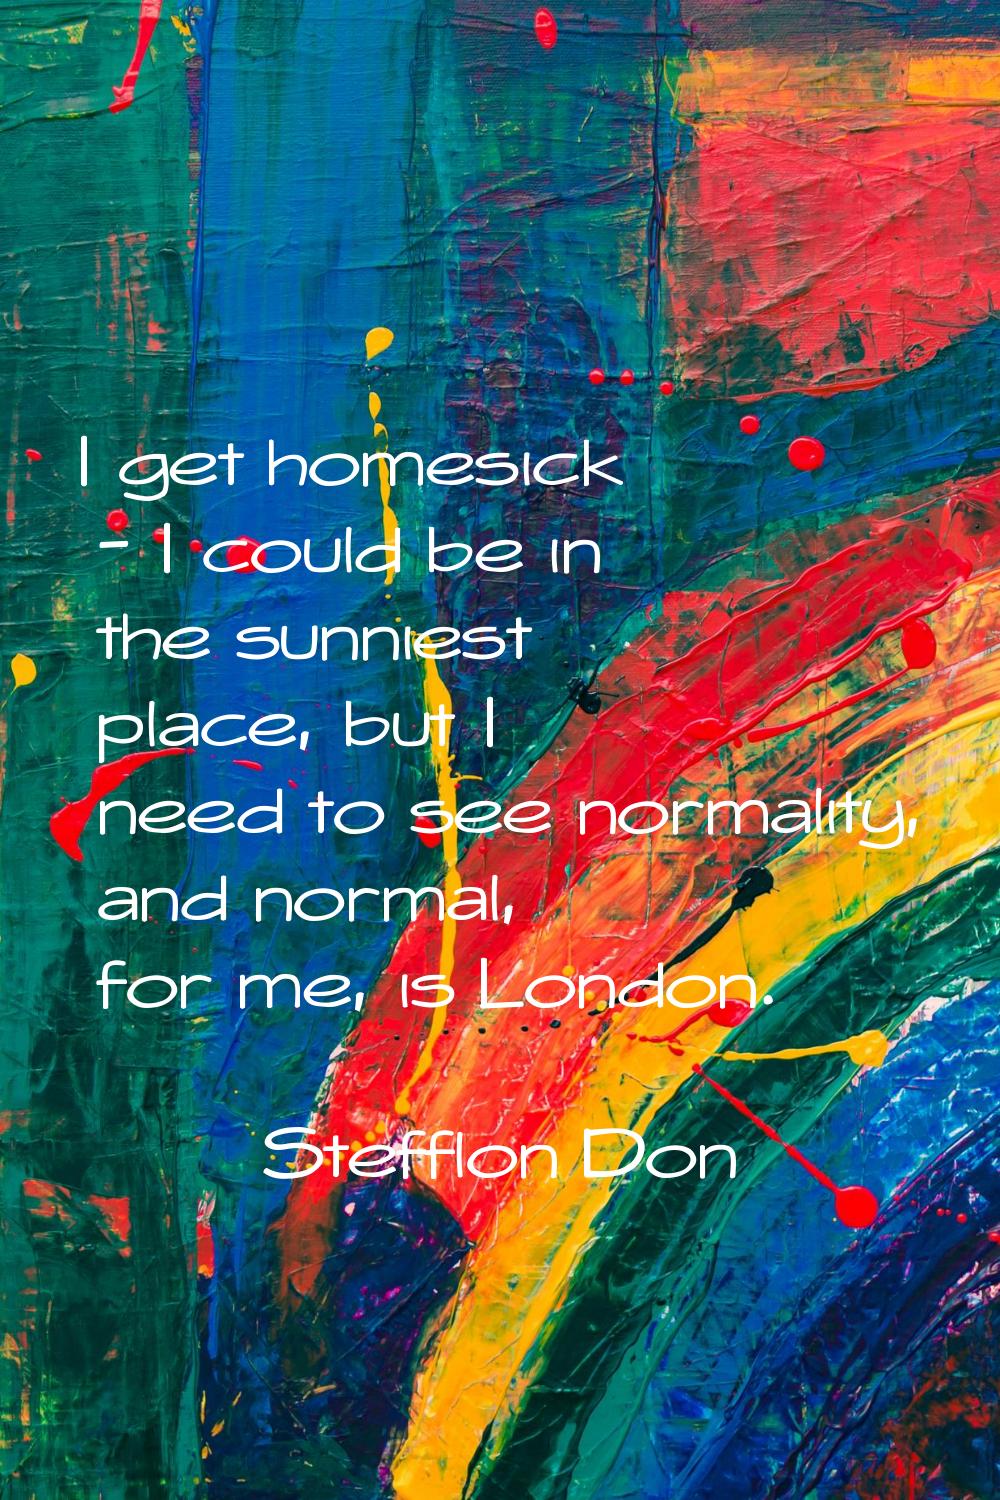 I get homesick - I could be in the sunniest place, but I need to see normality, and normal, for me,